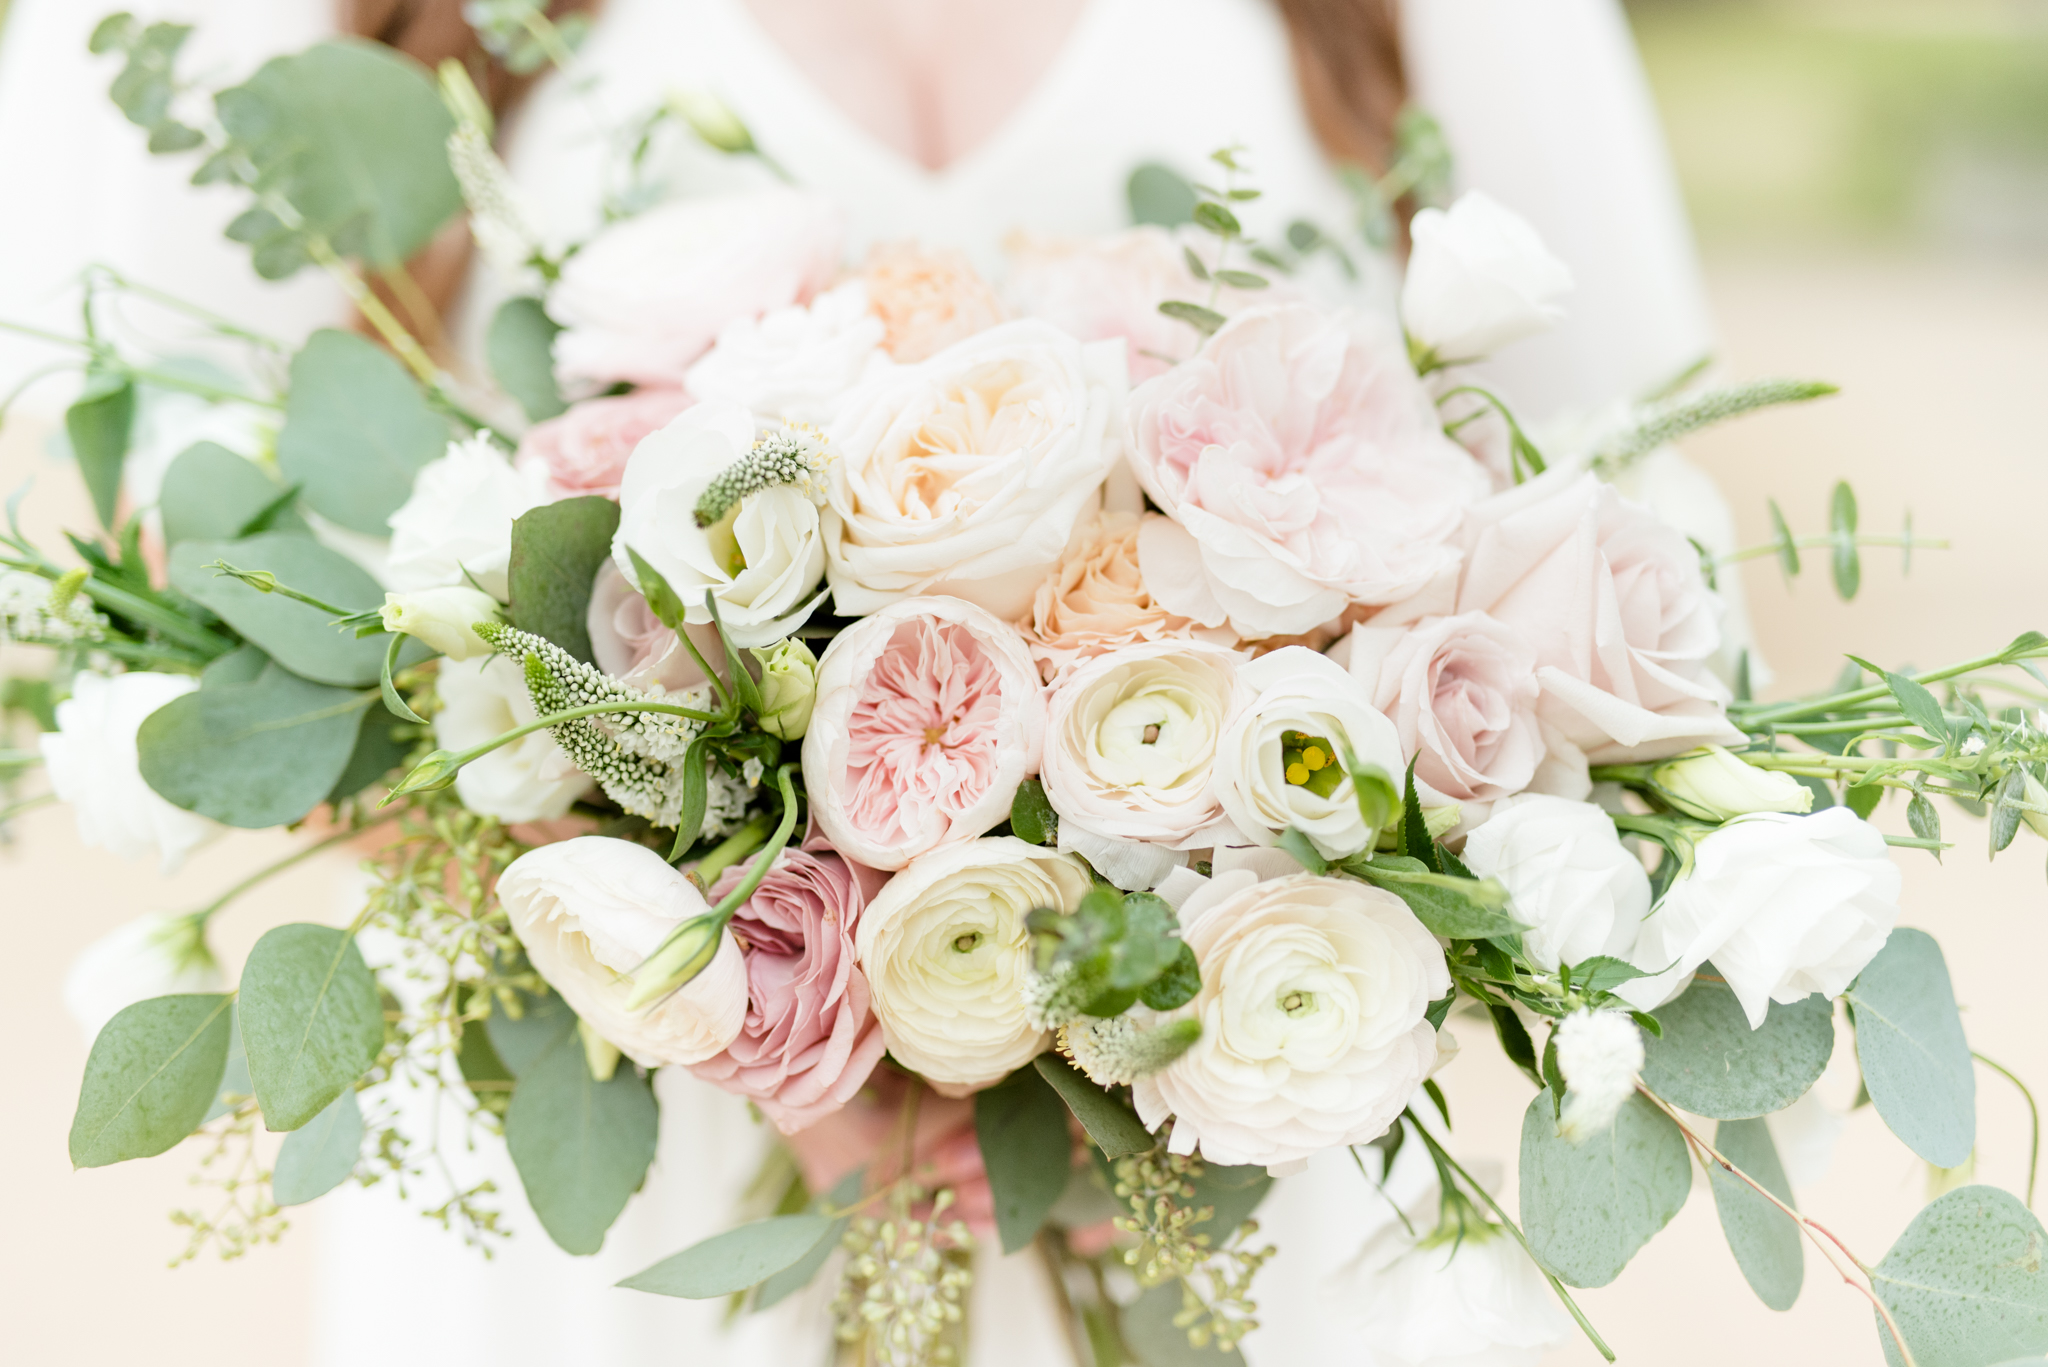 White and pink wedding bouquet.